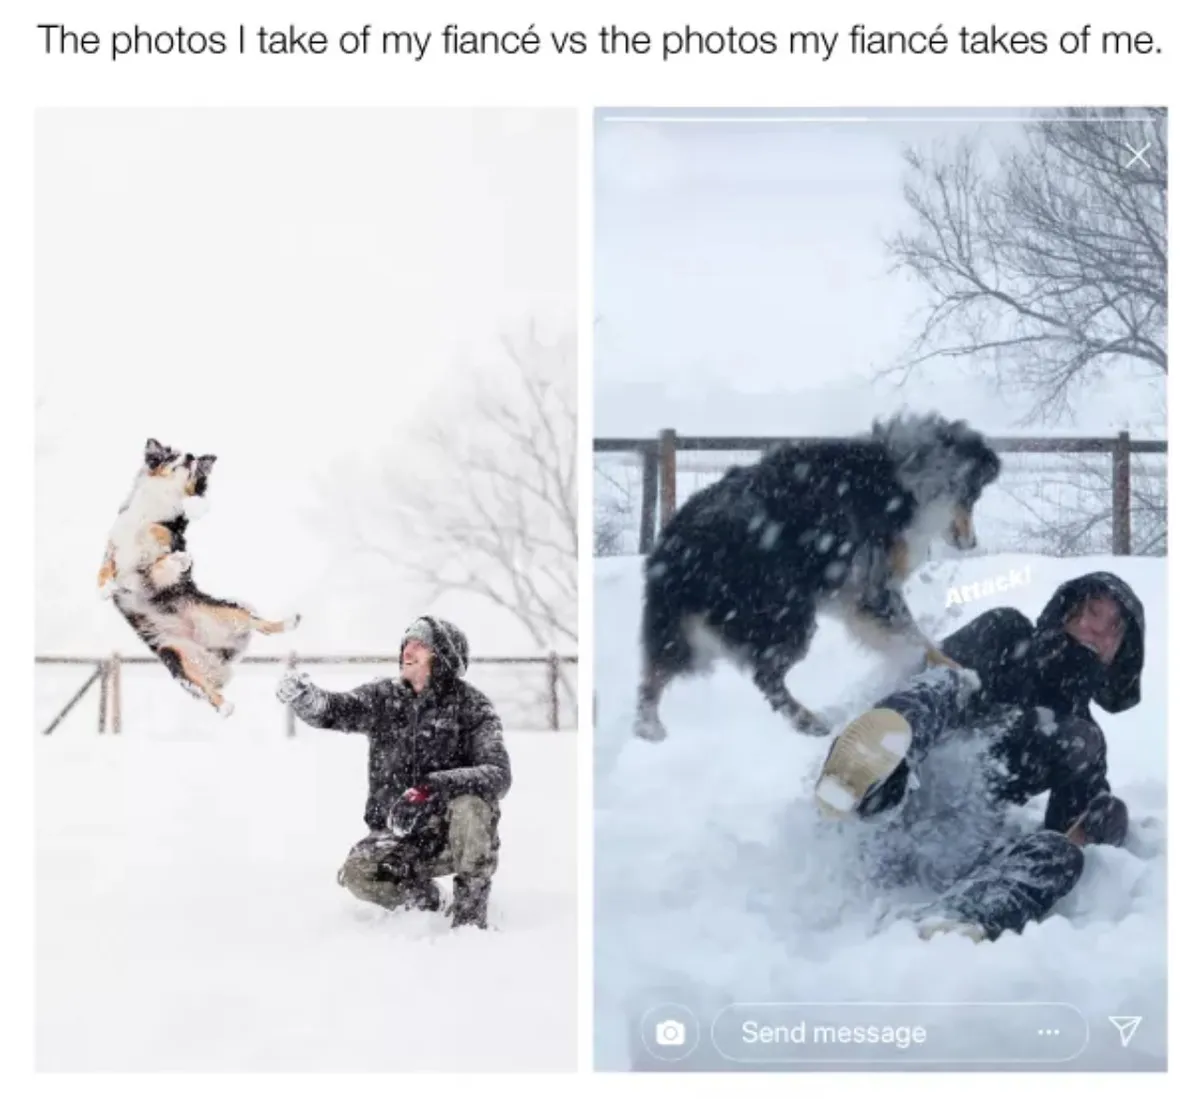 woman shows that she takes great photos of fiance and he takes horrid photos of her